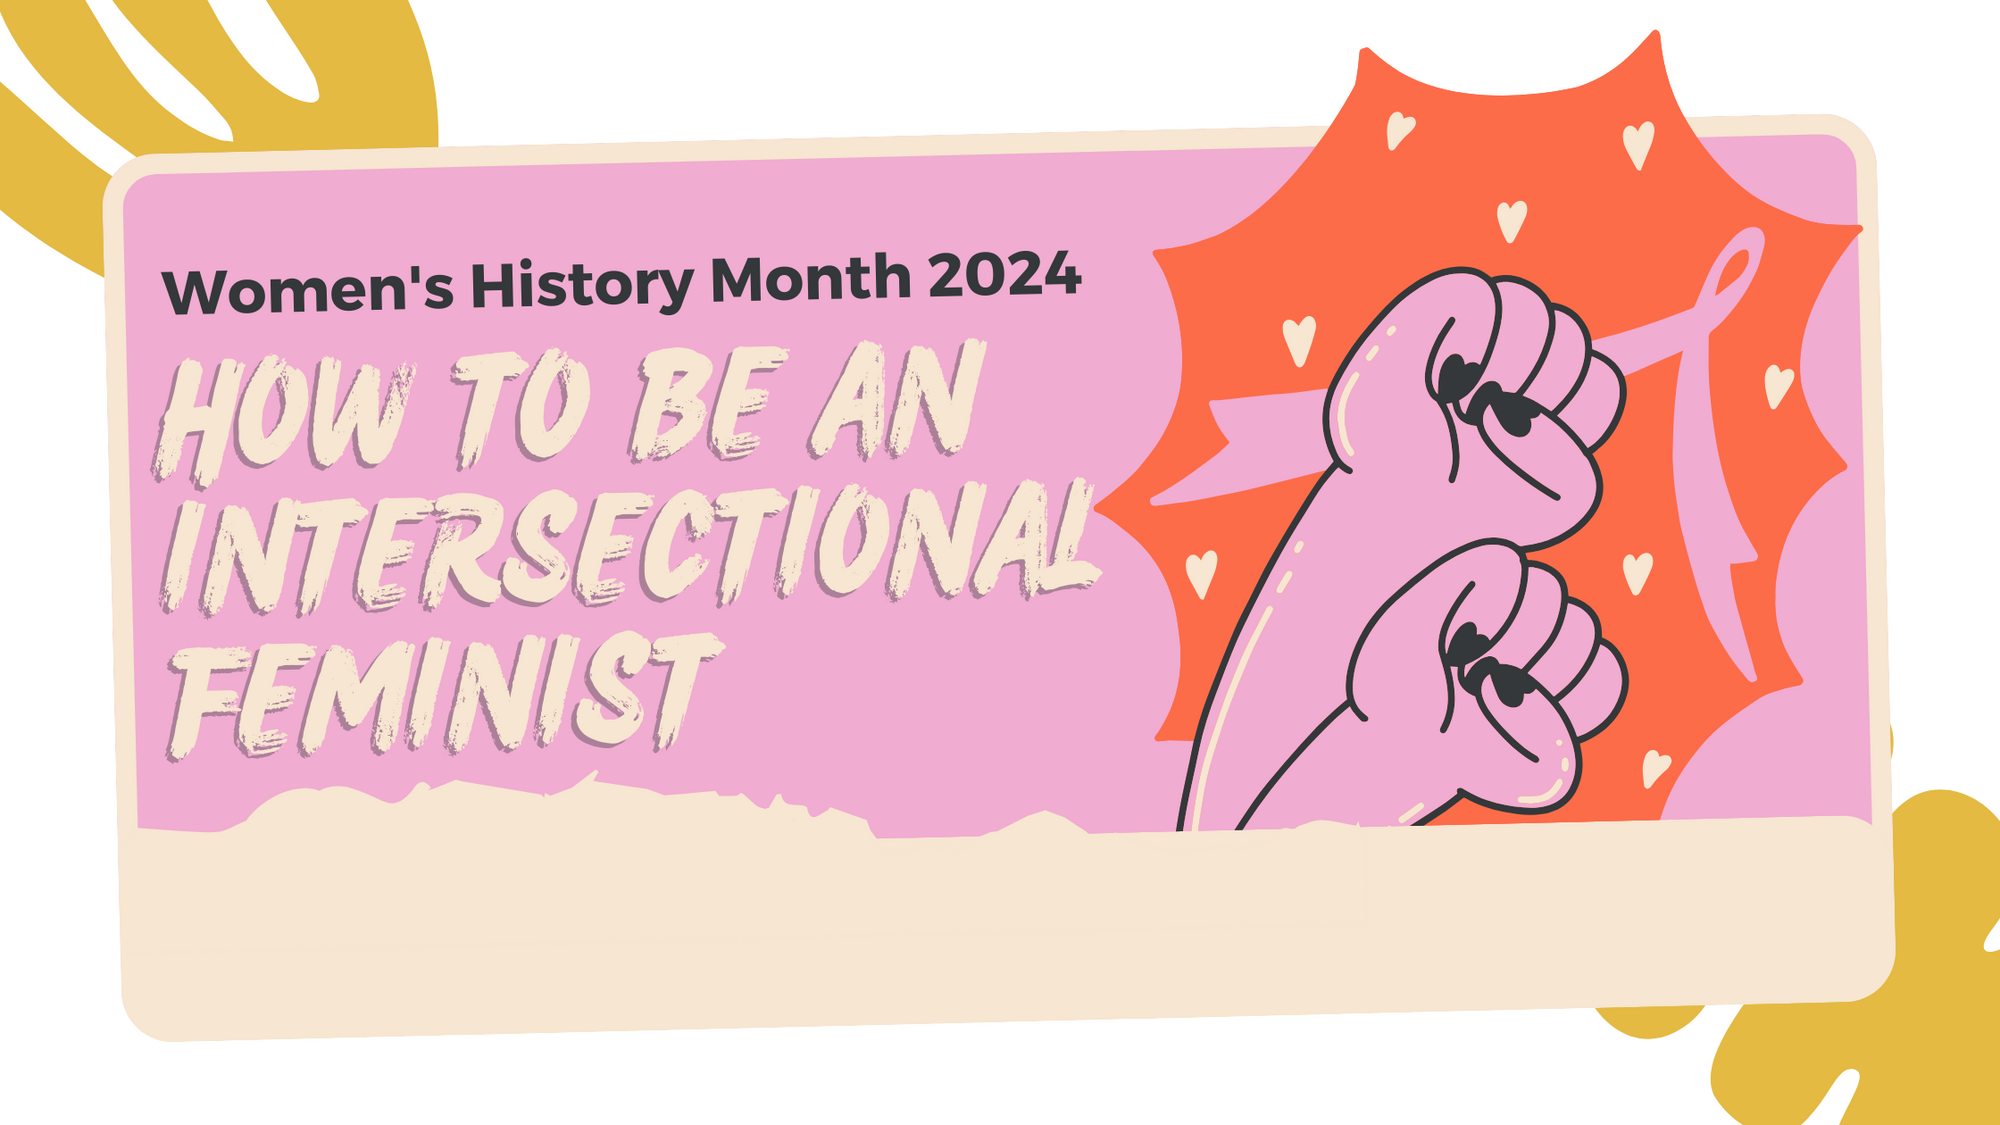 Women's History Month 2024: How to be an intersectional feminist